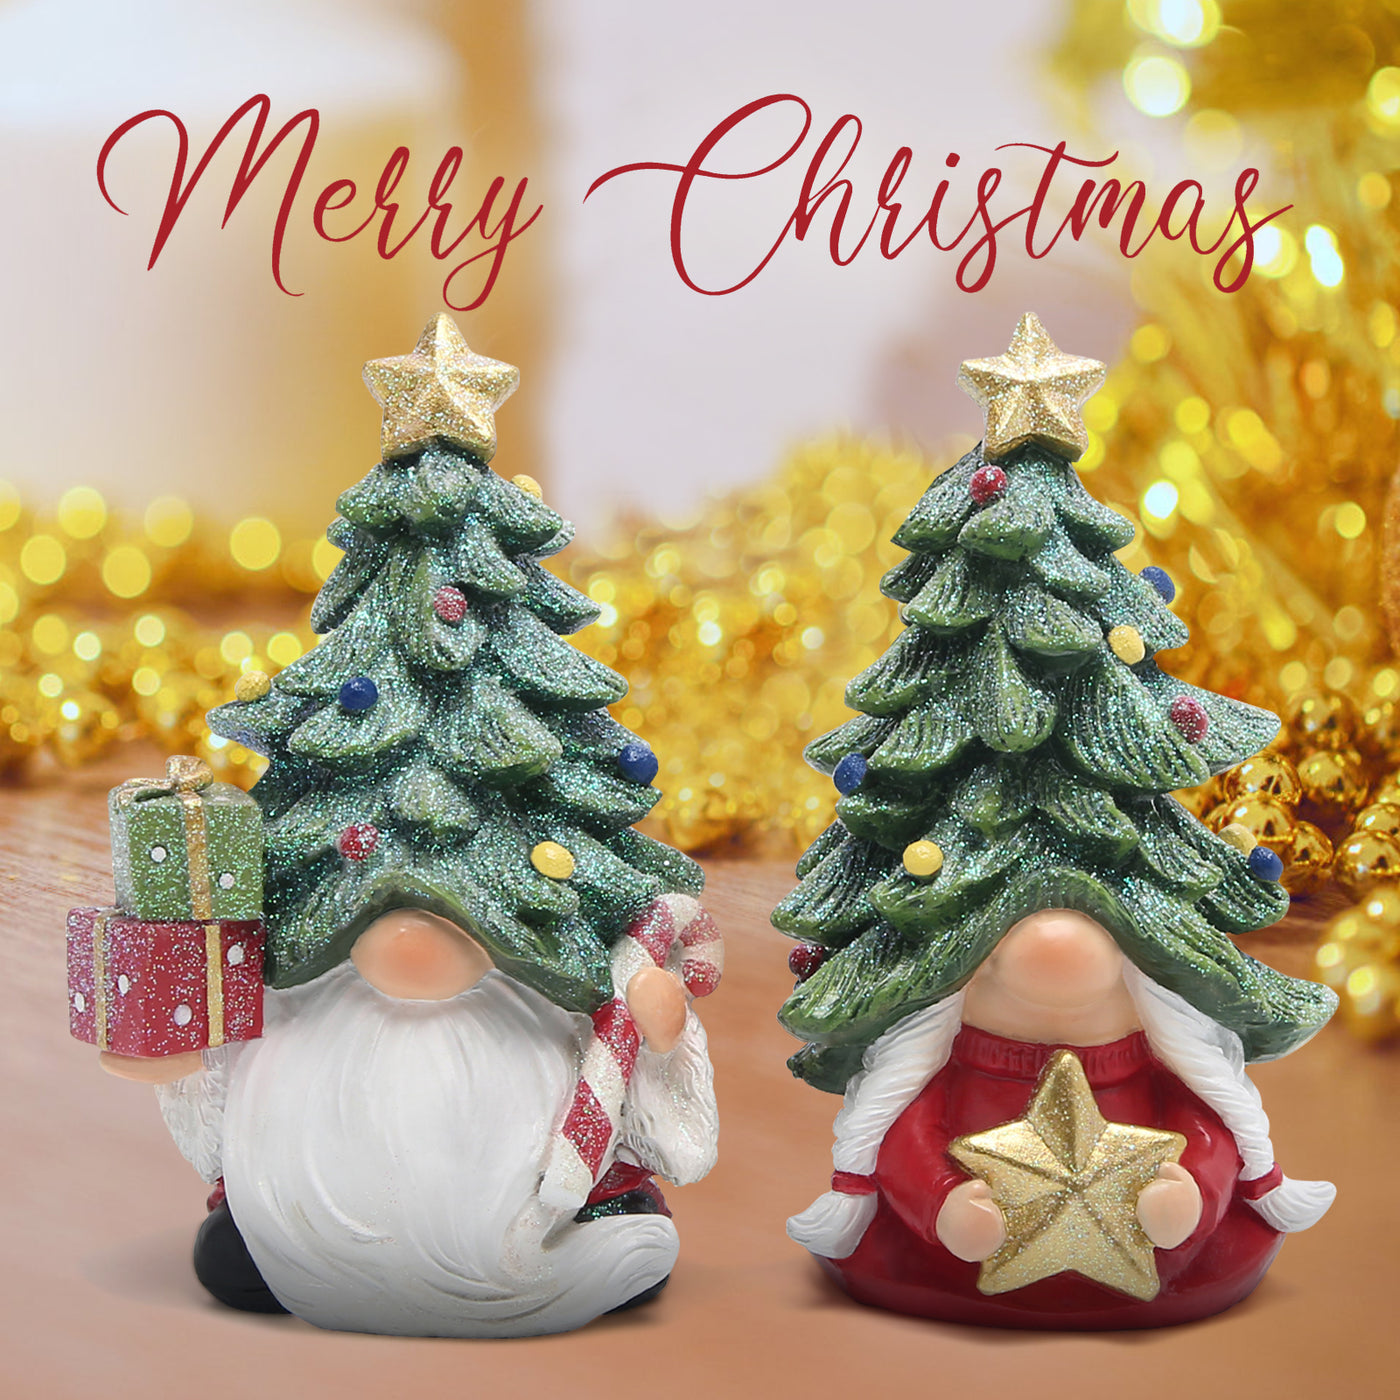 Hodao Christmas Gnomes Collection Figurines Decorations for Home